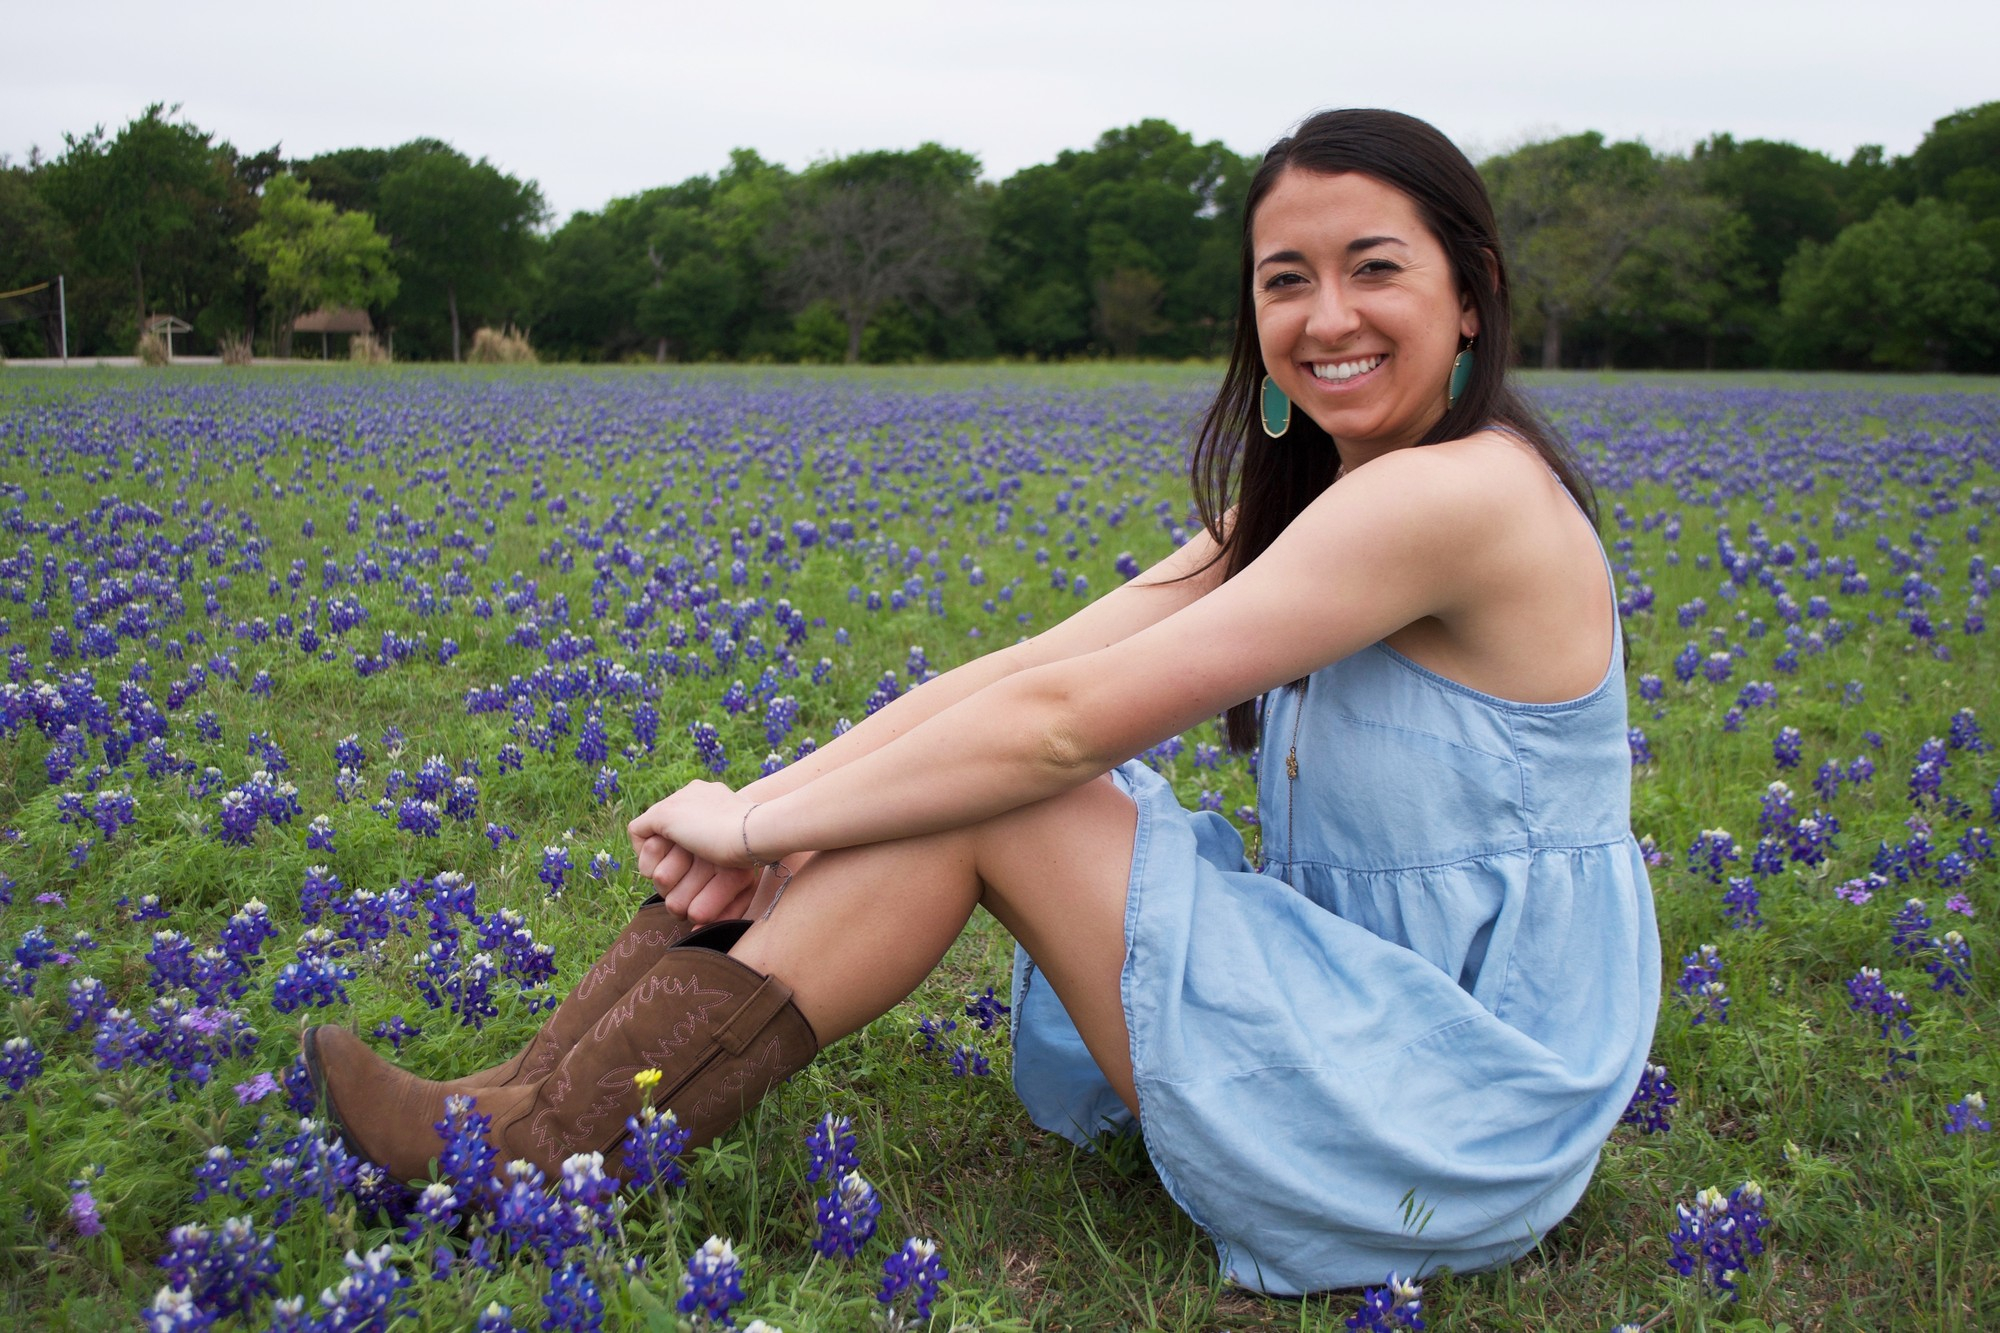 2000x1333 Bluebonnets Are Back: tips and tricks for taking pictures with the beloved Texas flower | The Baylor Lariat